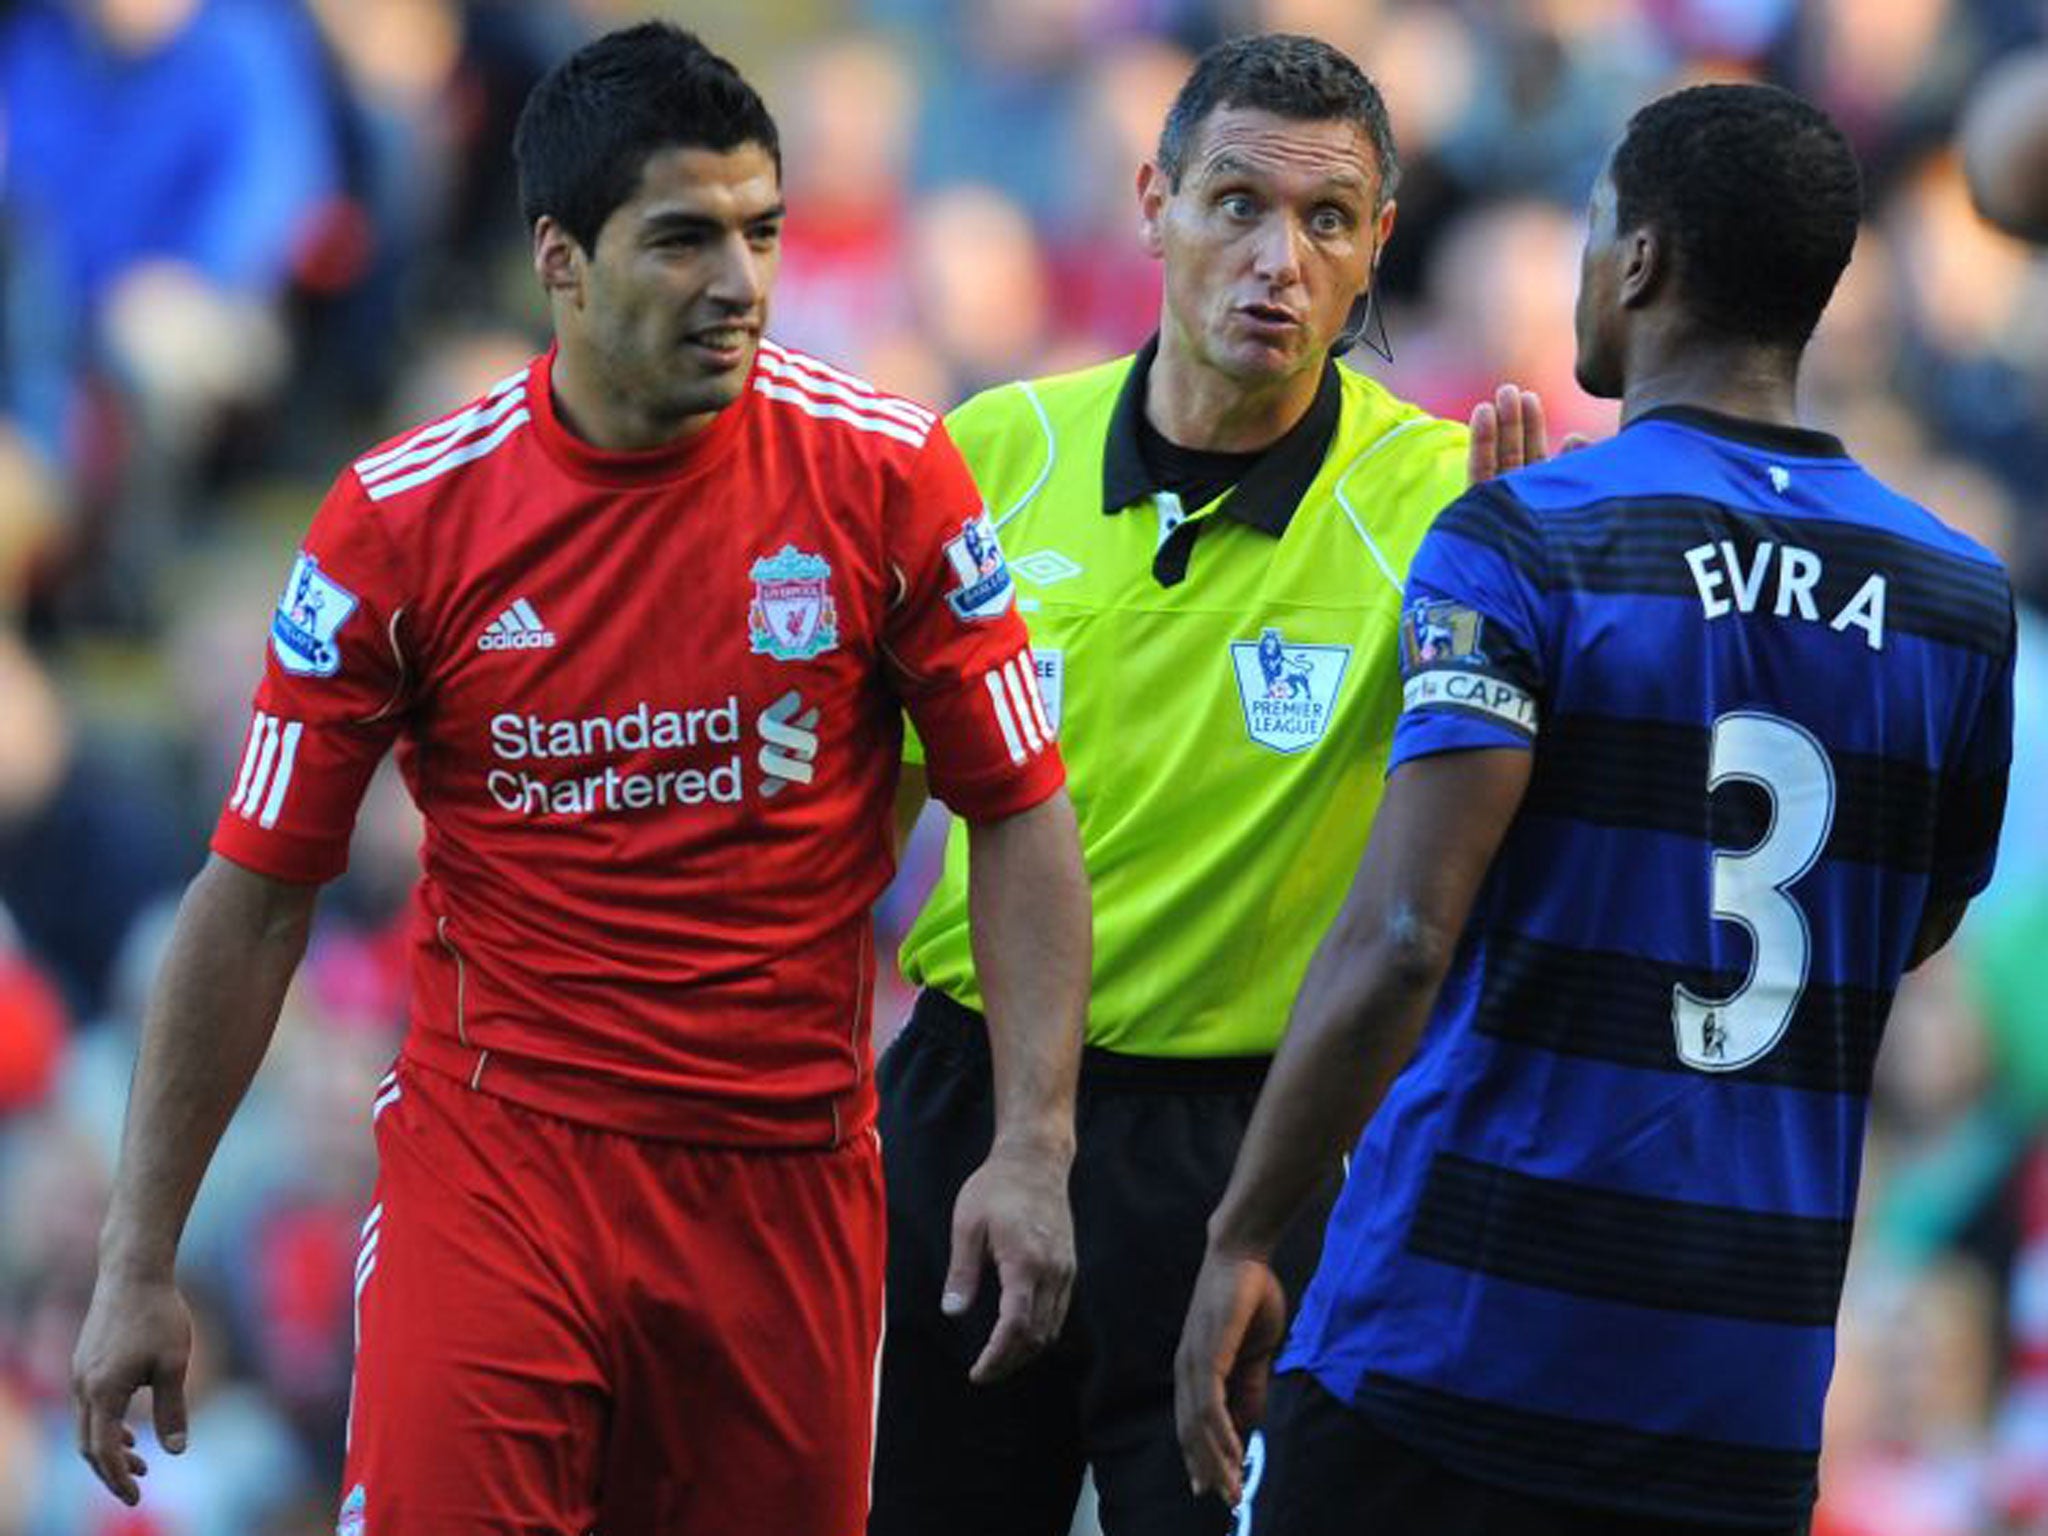 Referee Andrew Marriner comes between Luis Suarez and Patrice Evra in an infamous racial incident in October 2011